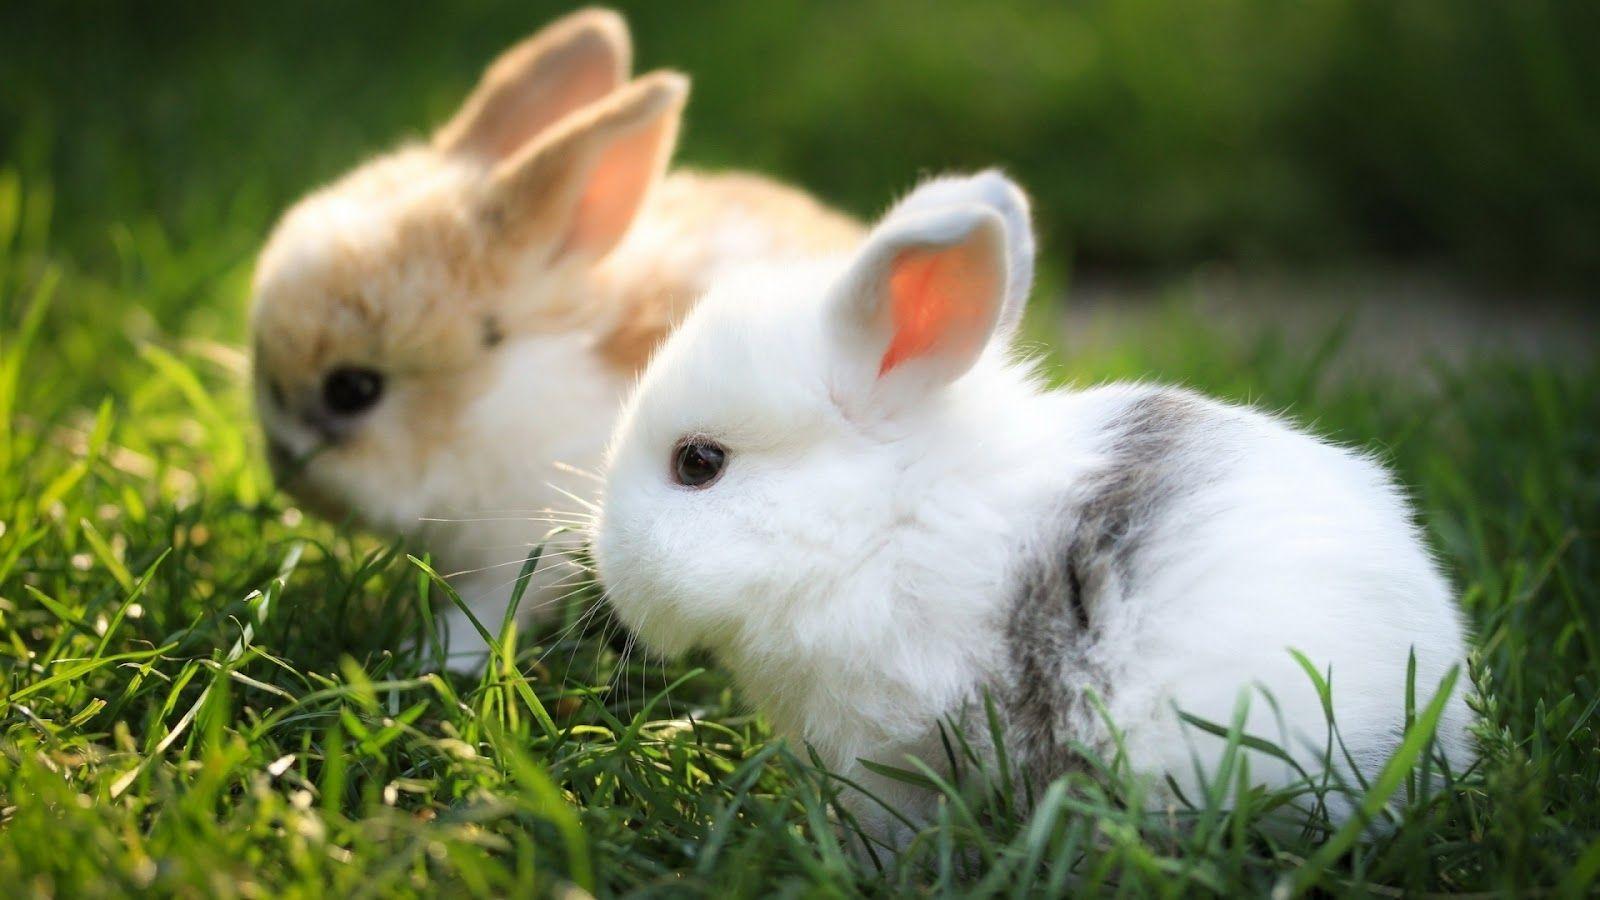 Rabbits image Bunnies HD wallpaper and background photo